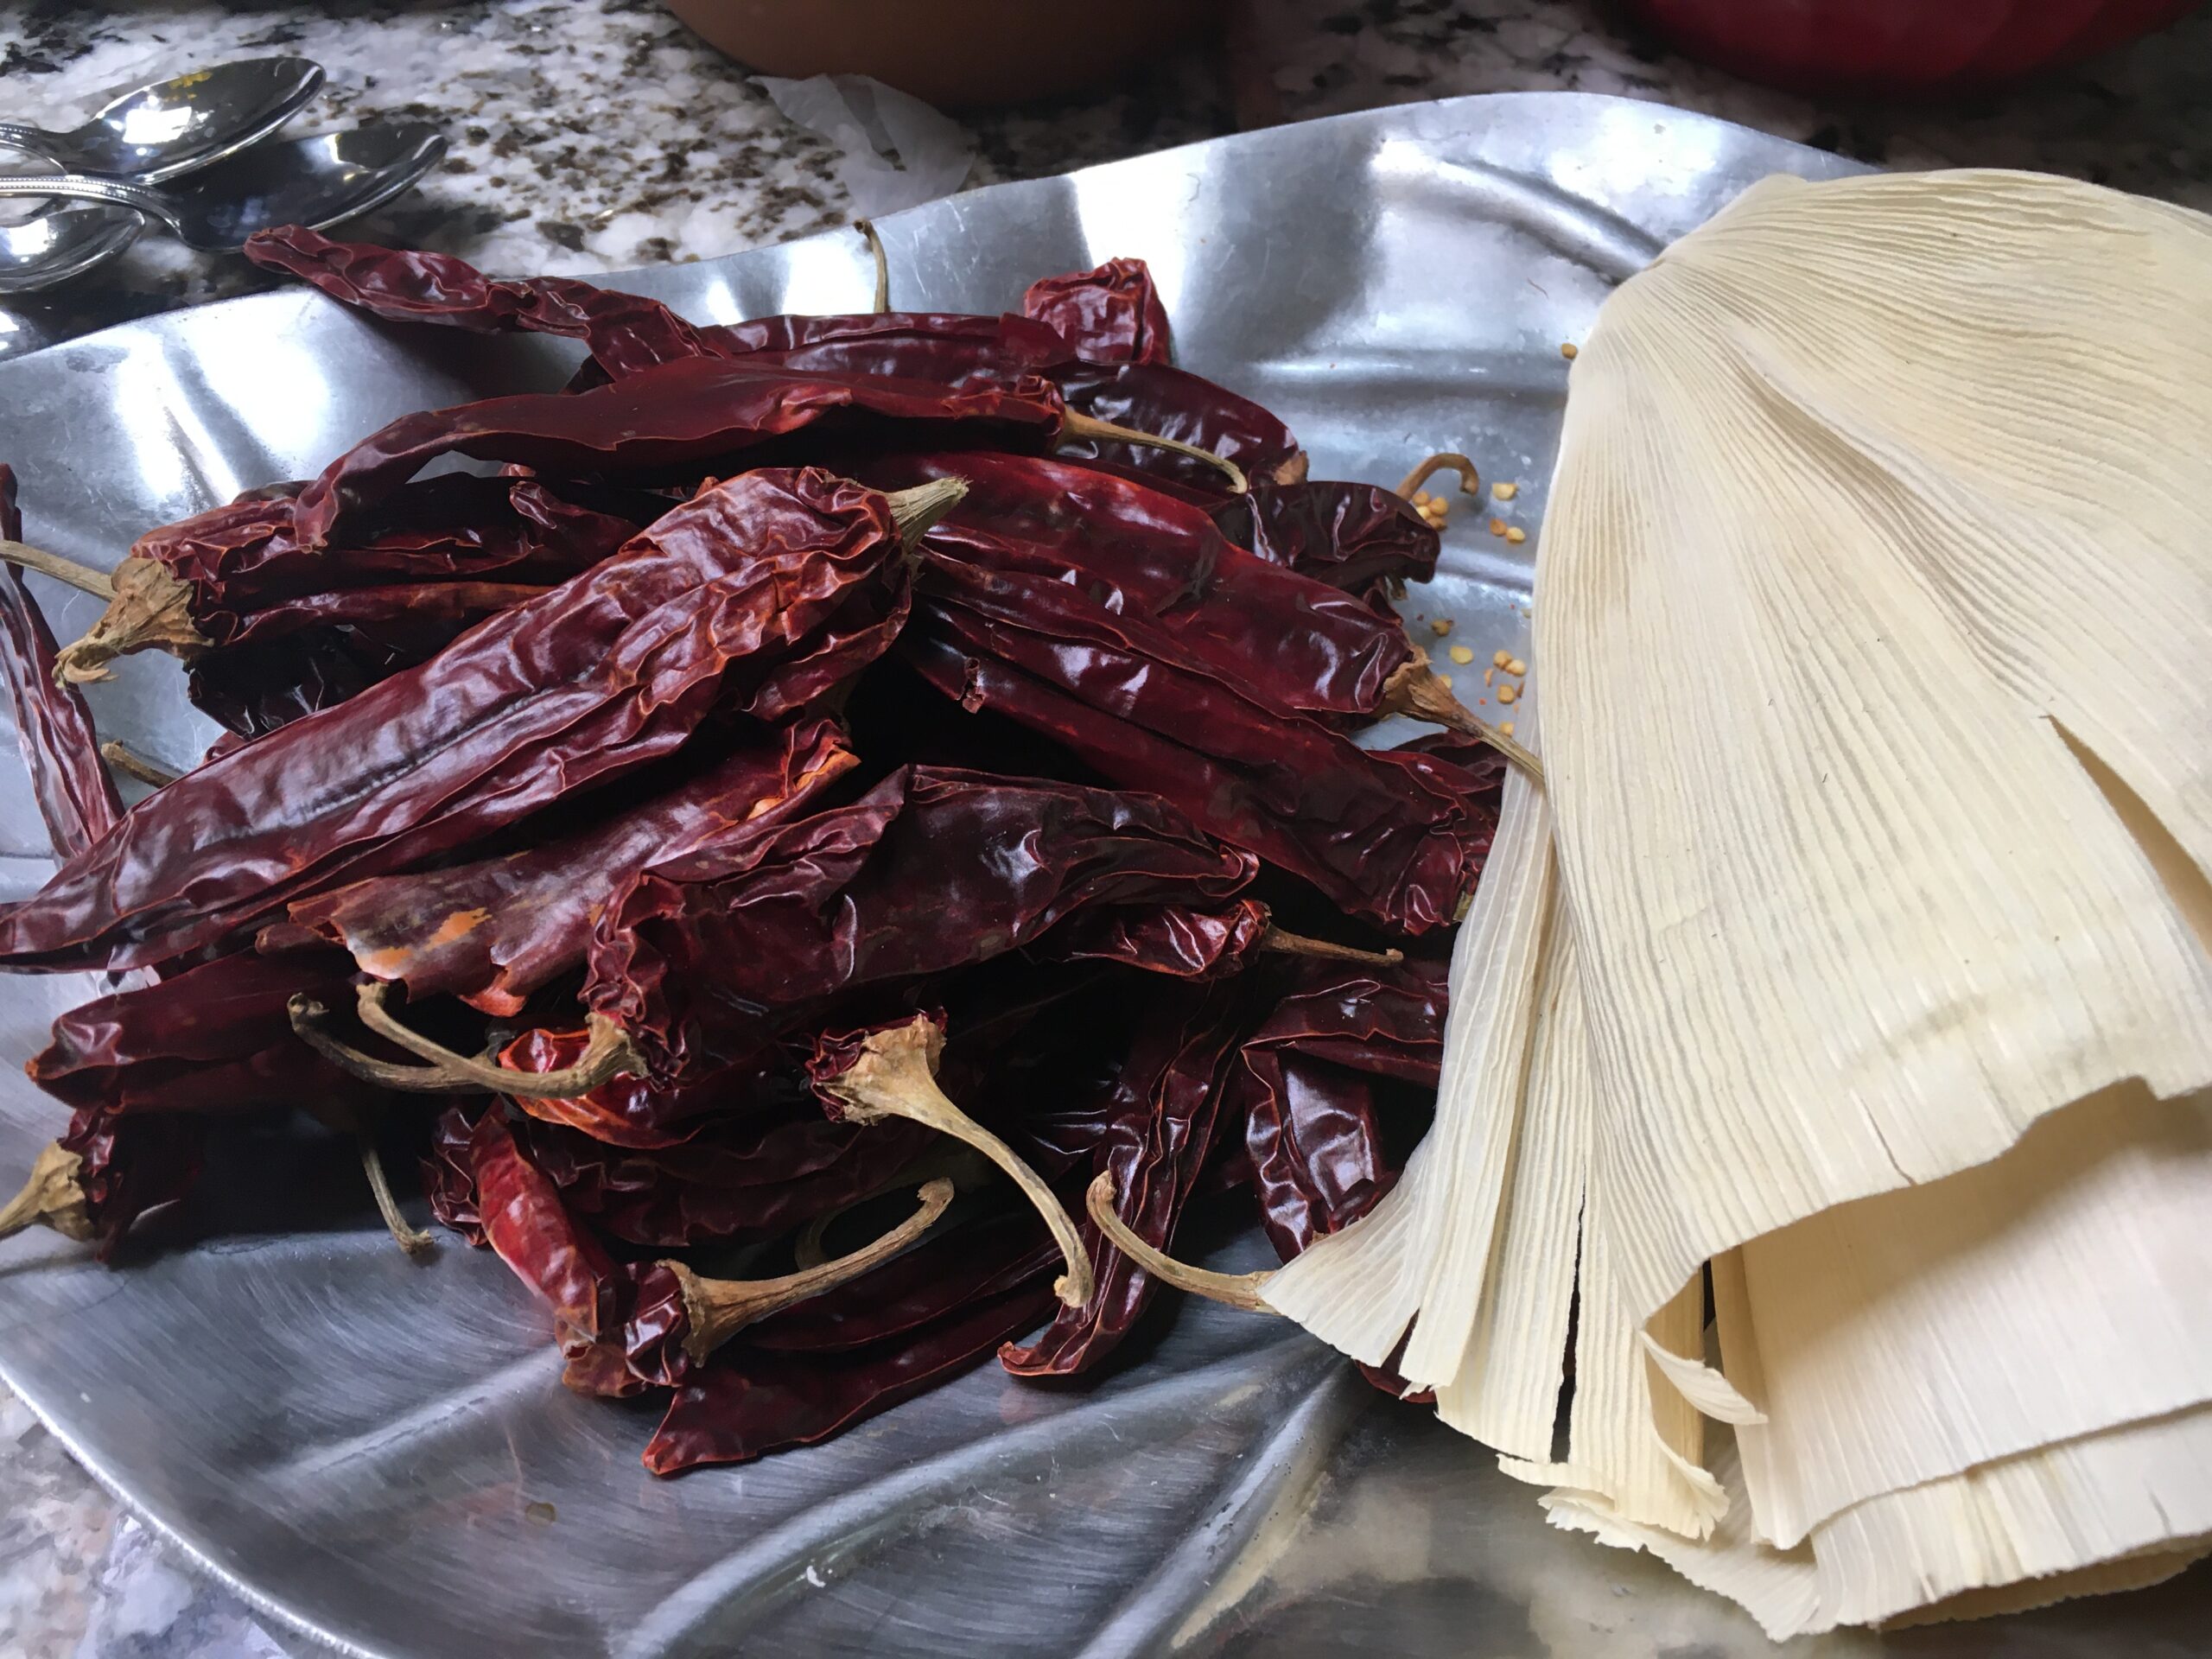 It’s tamale time at Sylvia’s La Canasta